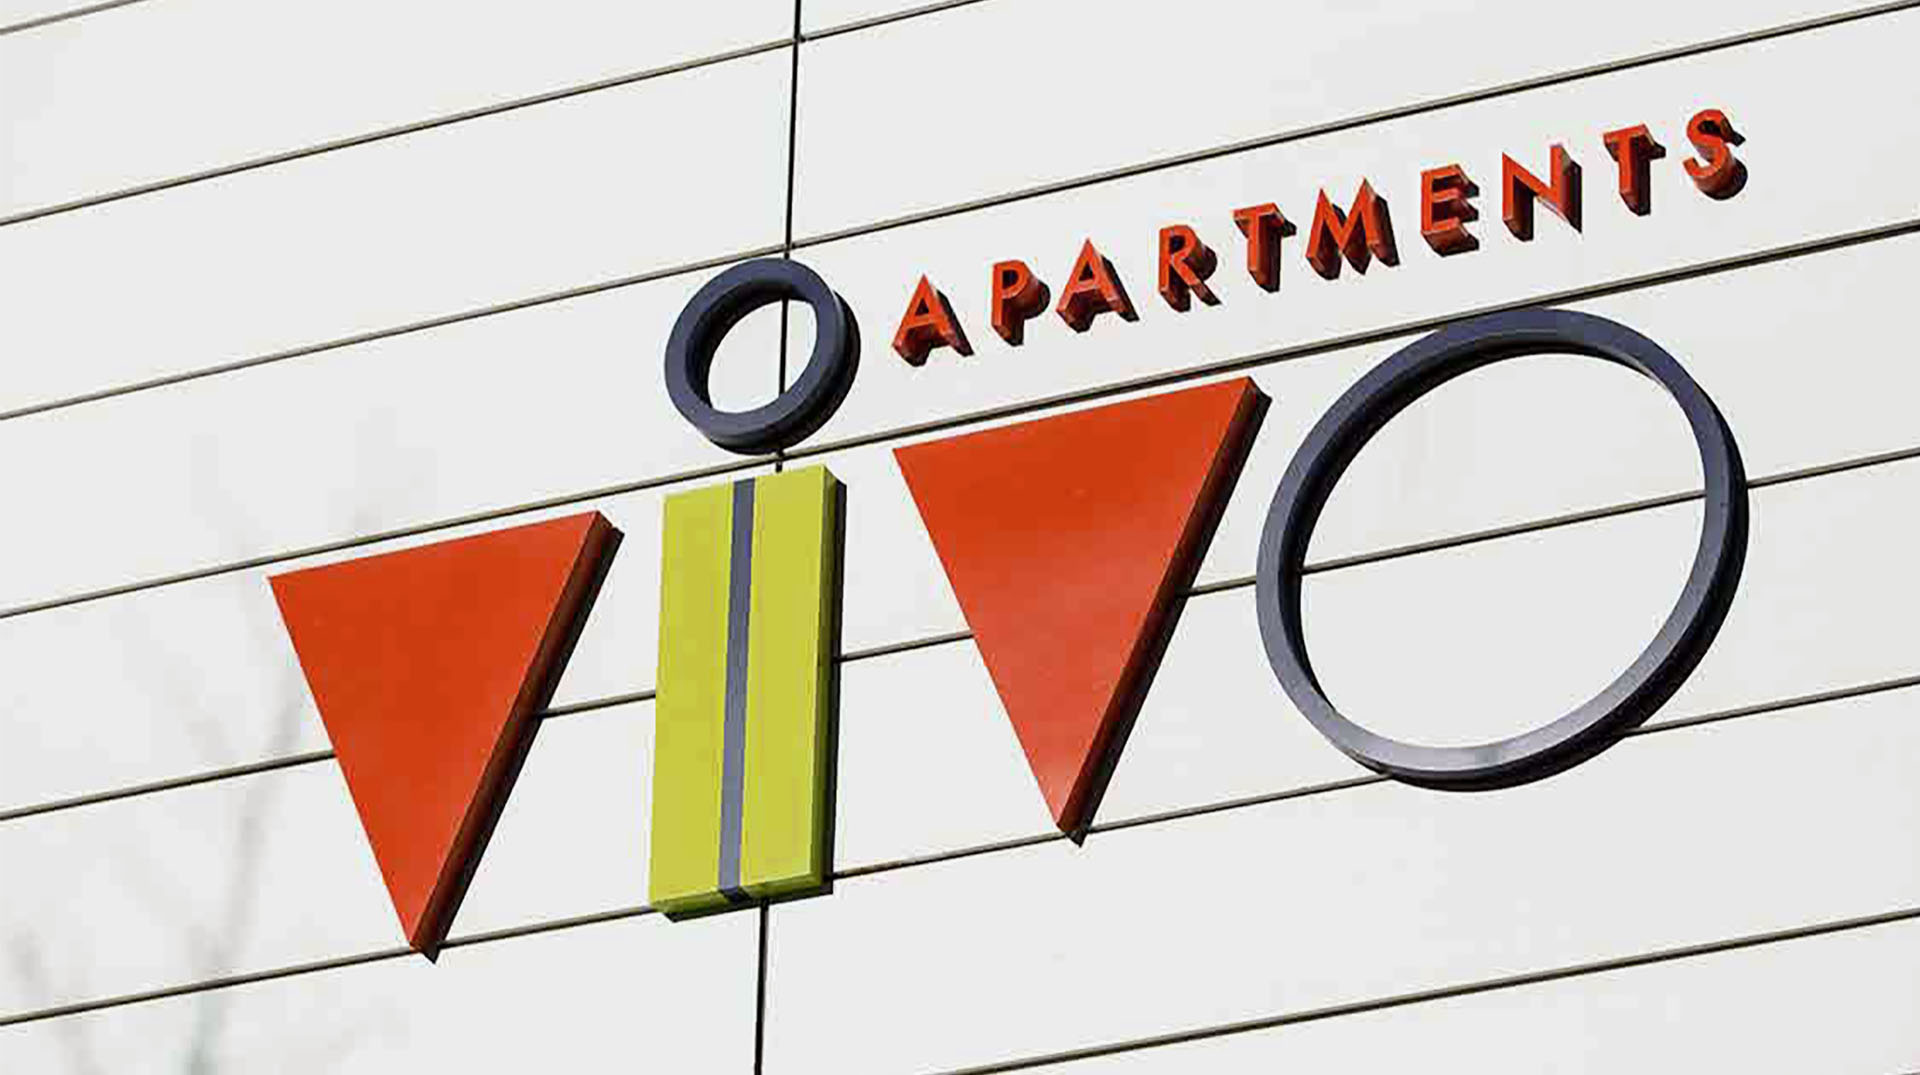 vivo building signage on white wall